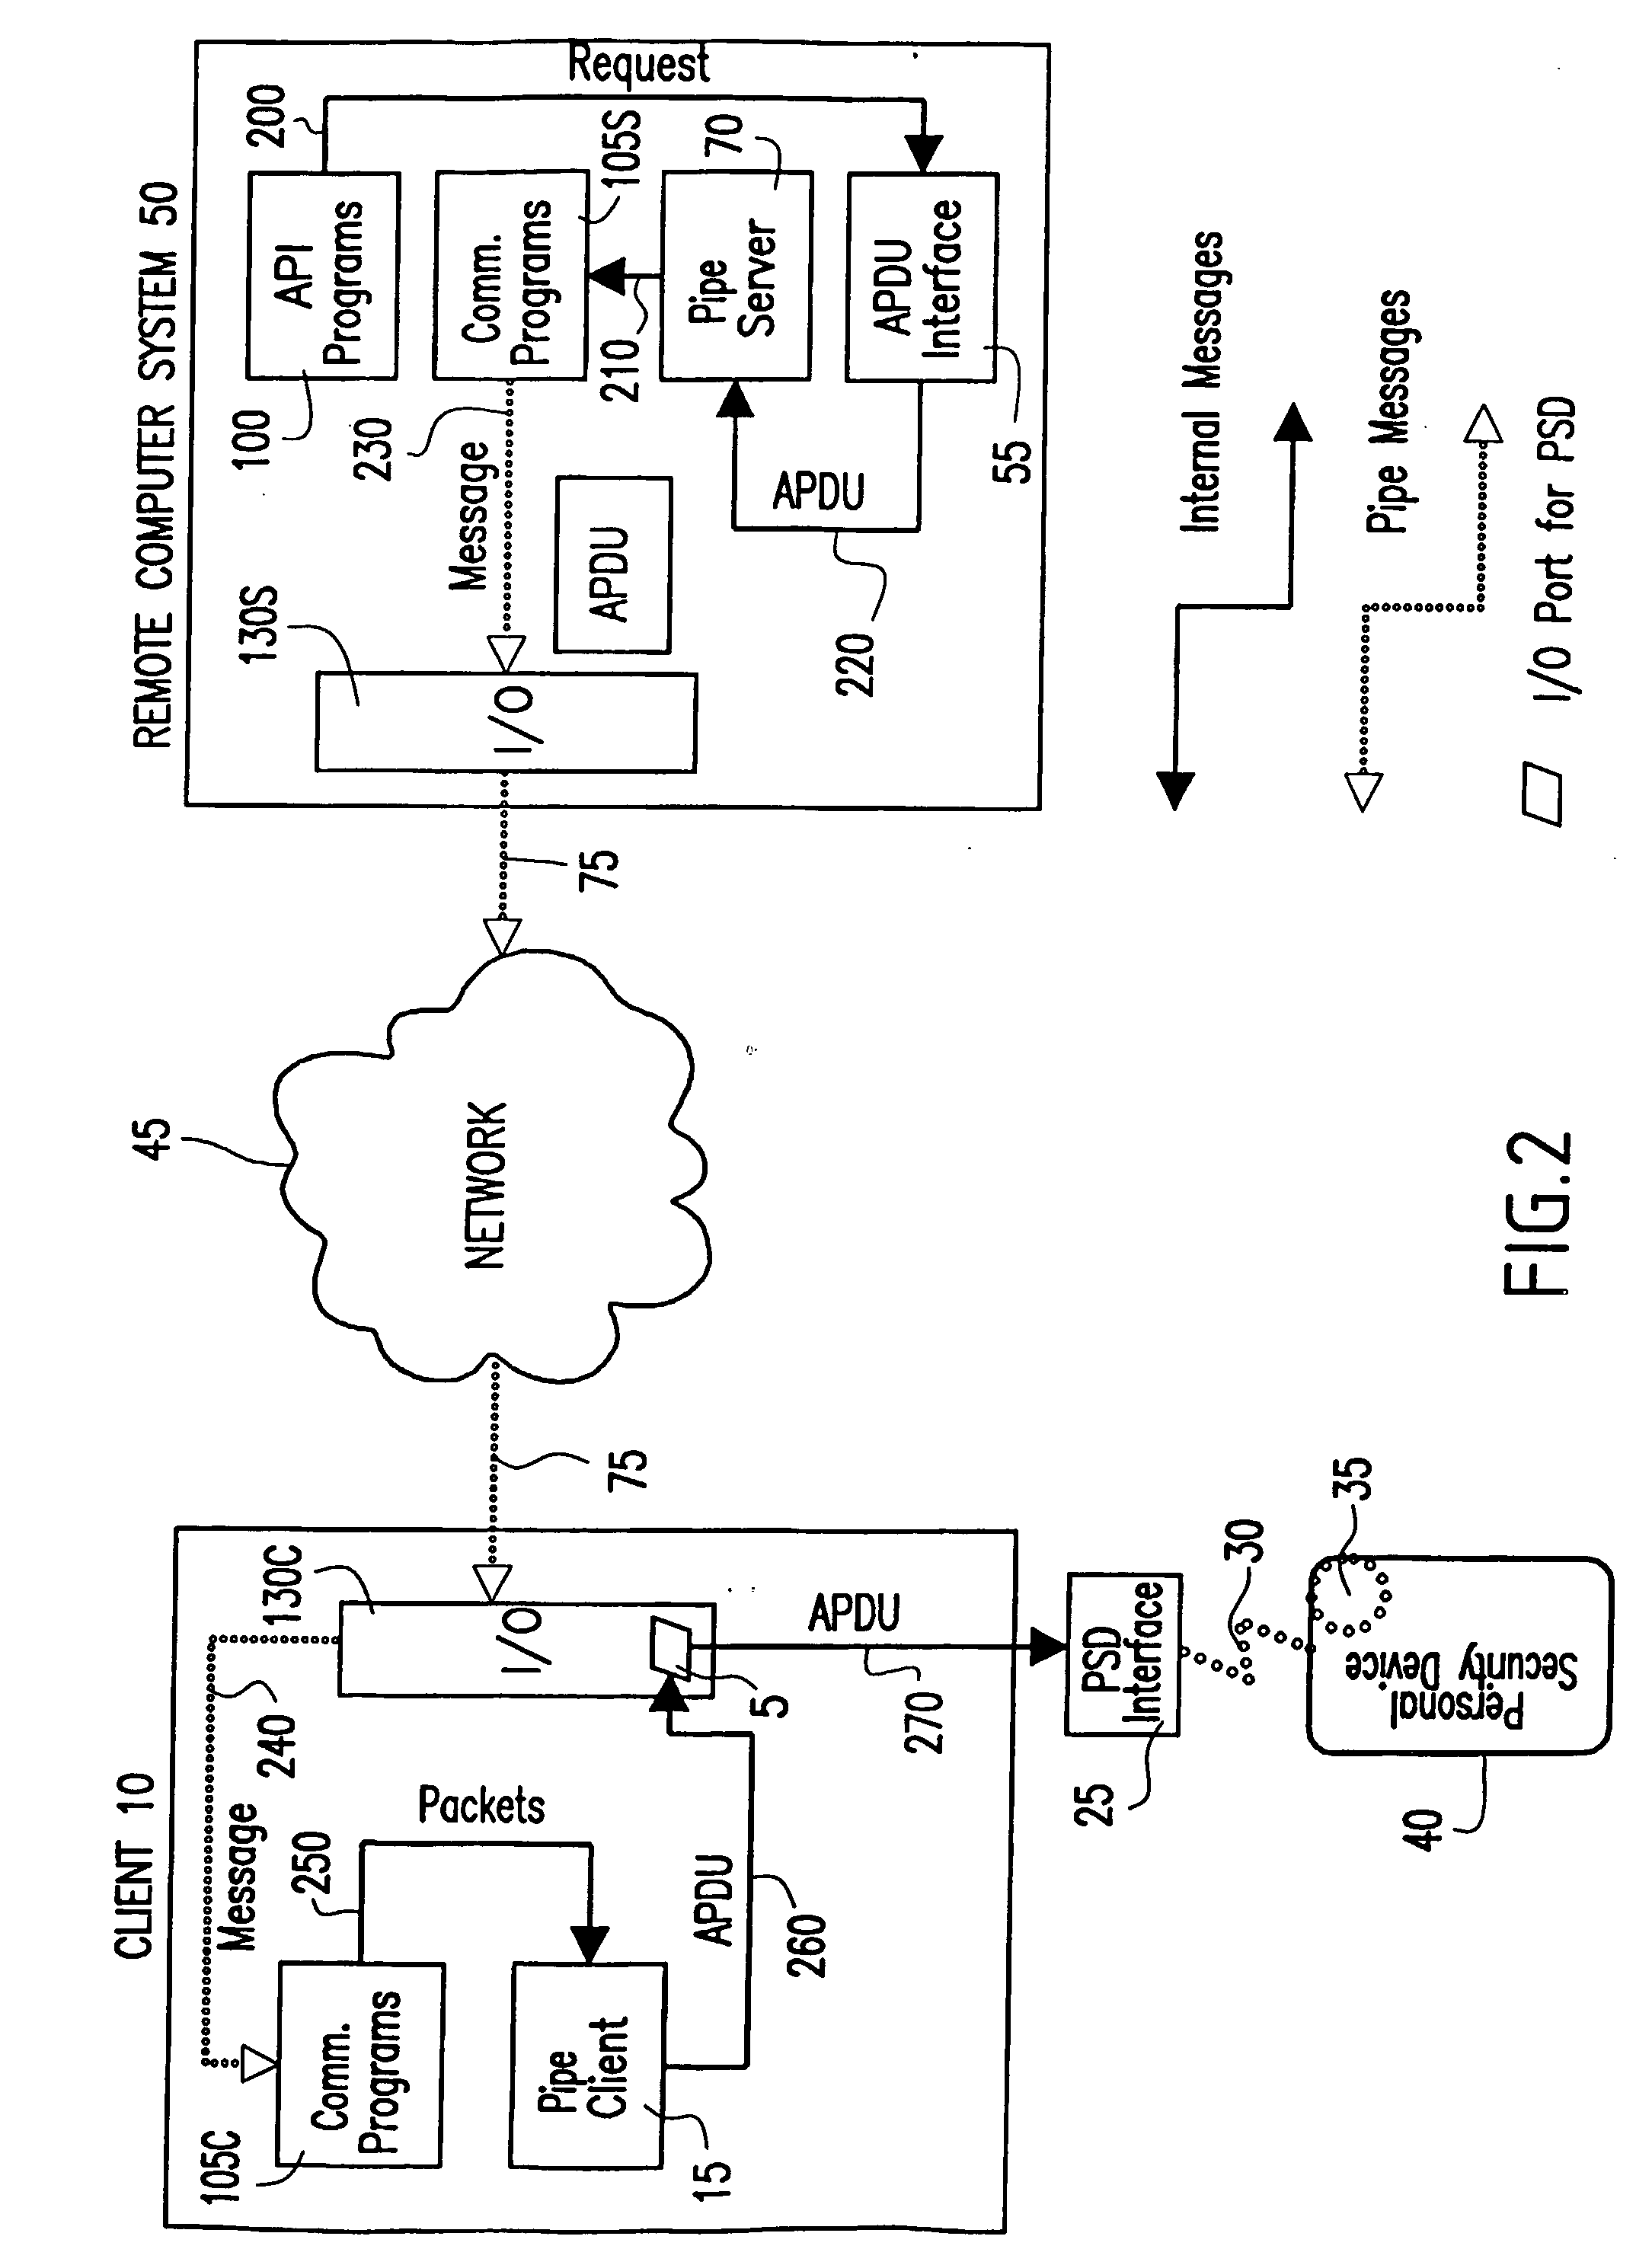 Method and system for establishing a communications pipe between a personal security device and a remote computer system